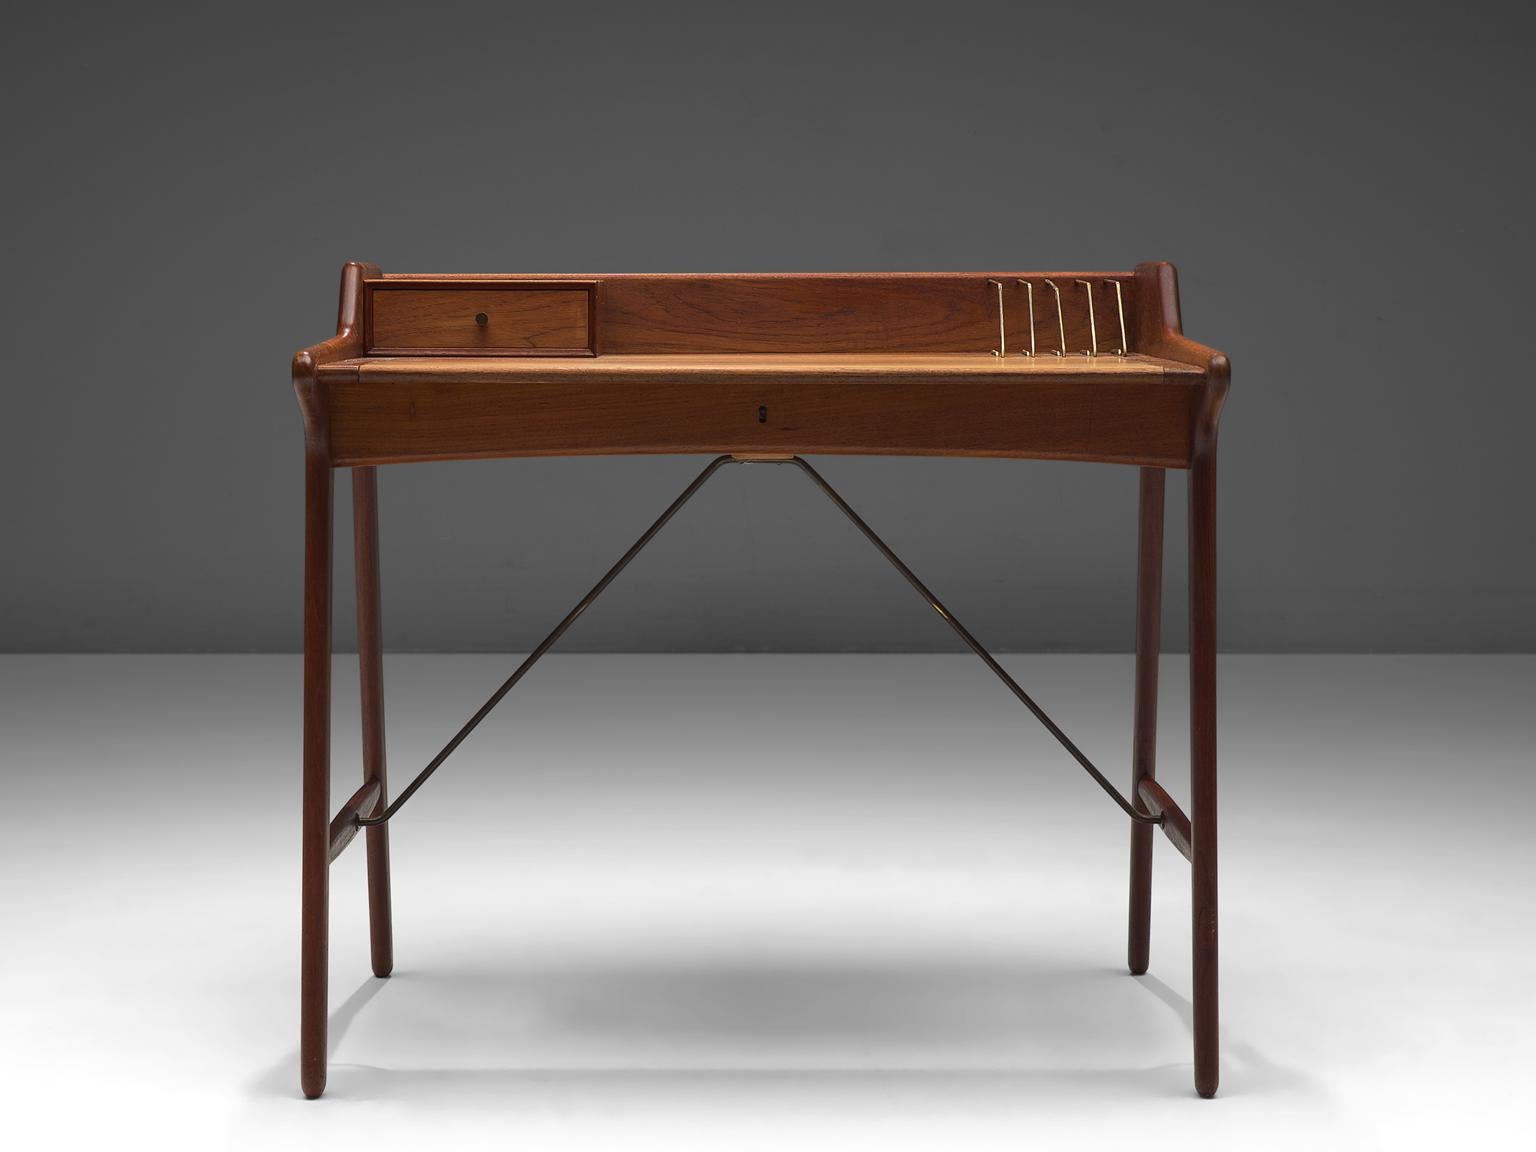 Svend Aage Madsen for K. Knudsen and Son, Desk, brass, teak, Denmark, 1950s.

This refined writing desk is designed by Svend Aage Madsen in the 1950s. The arching top holds a small drawer, and a couple of brass document-holders. Nice and